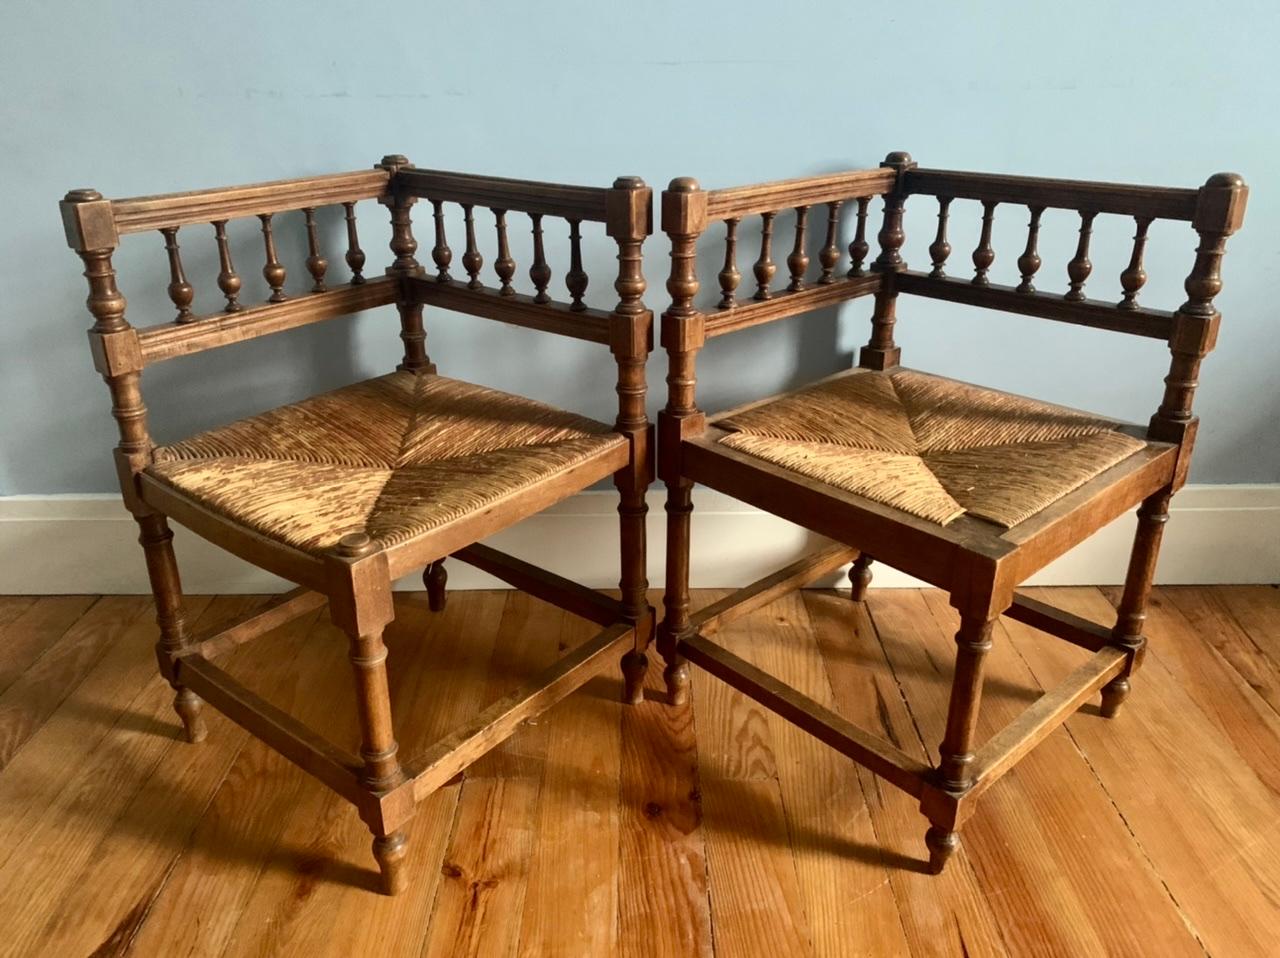 Set of wicker and oak chairs. They are not exactly the same. When joined together they form a small wicker bench. The backrest is composed of a series of colonnade, turned wood gallery. 
The chair alone is 16,53 inch x 16,53 inch. 
Sold with the